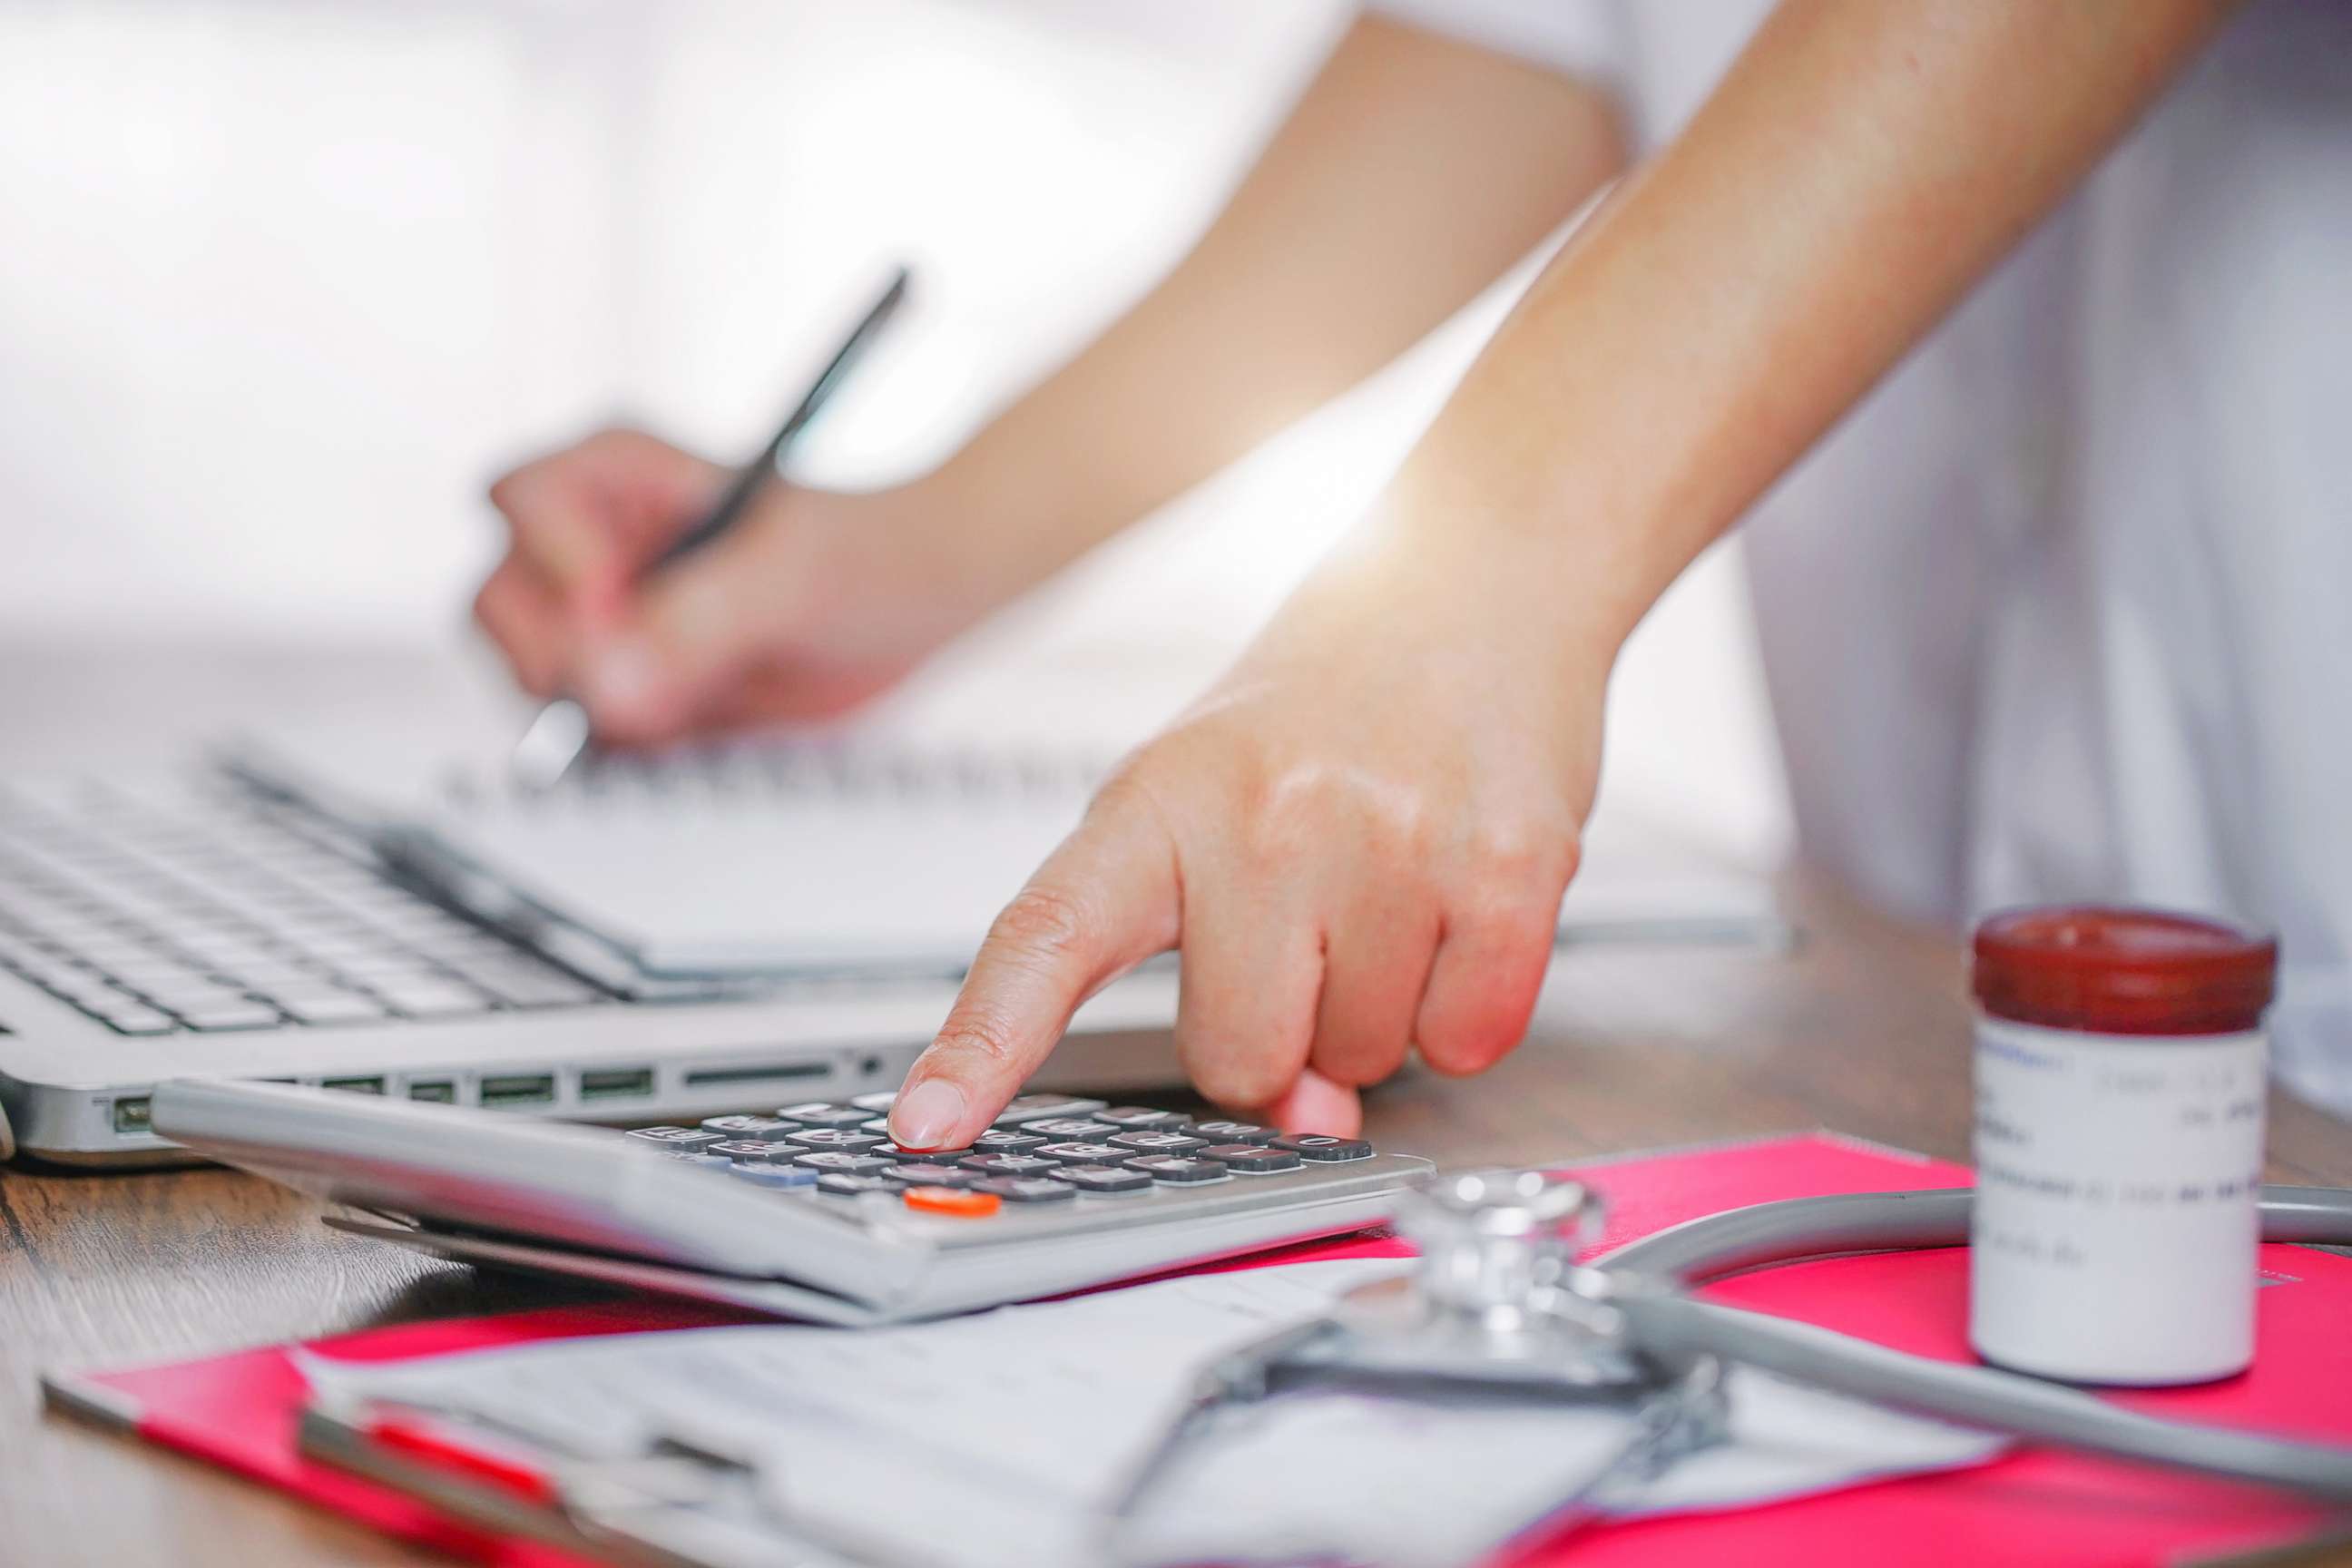 PHOTO: A person uses a calculator in a medical setting in an undated stock photo.